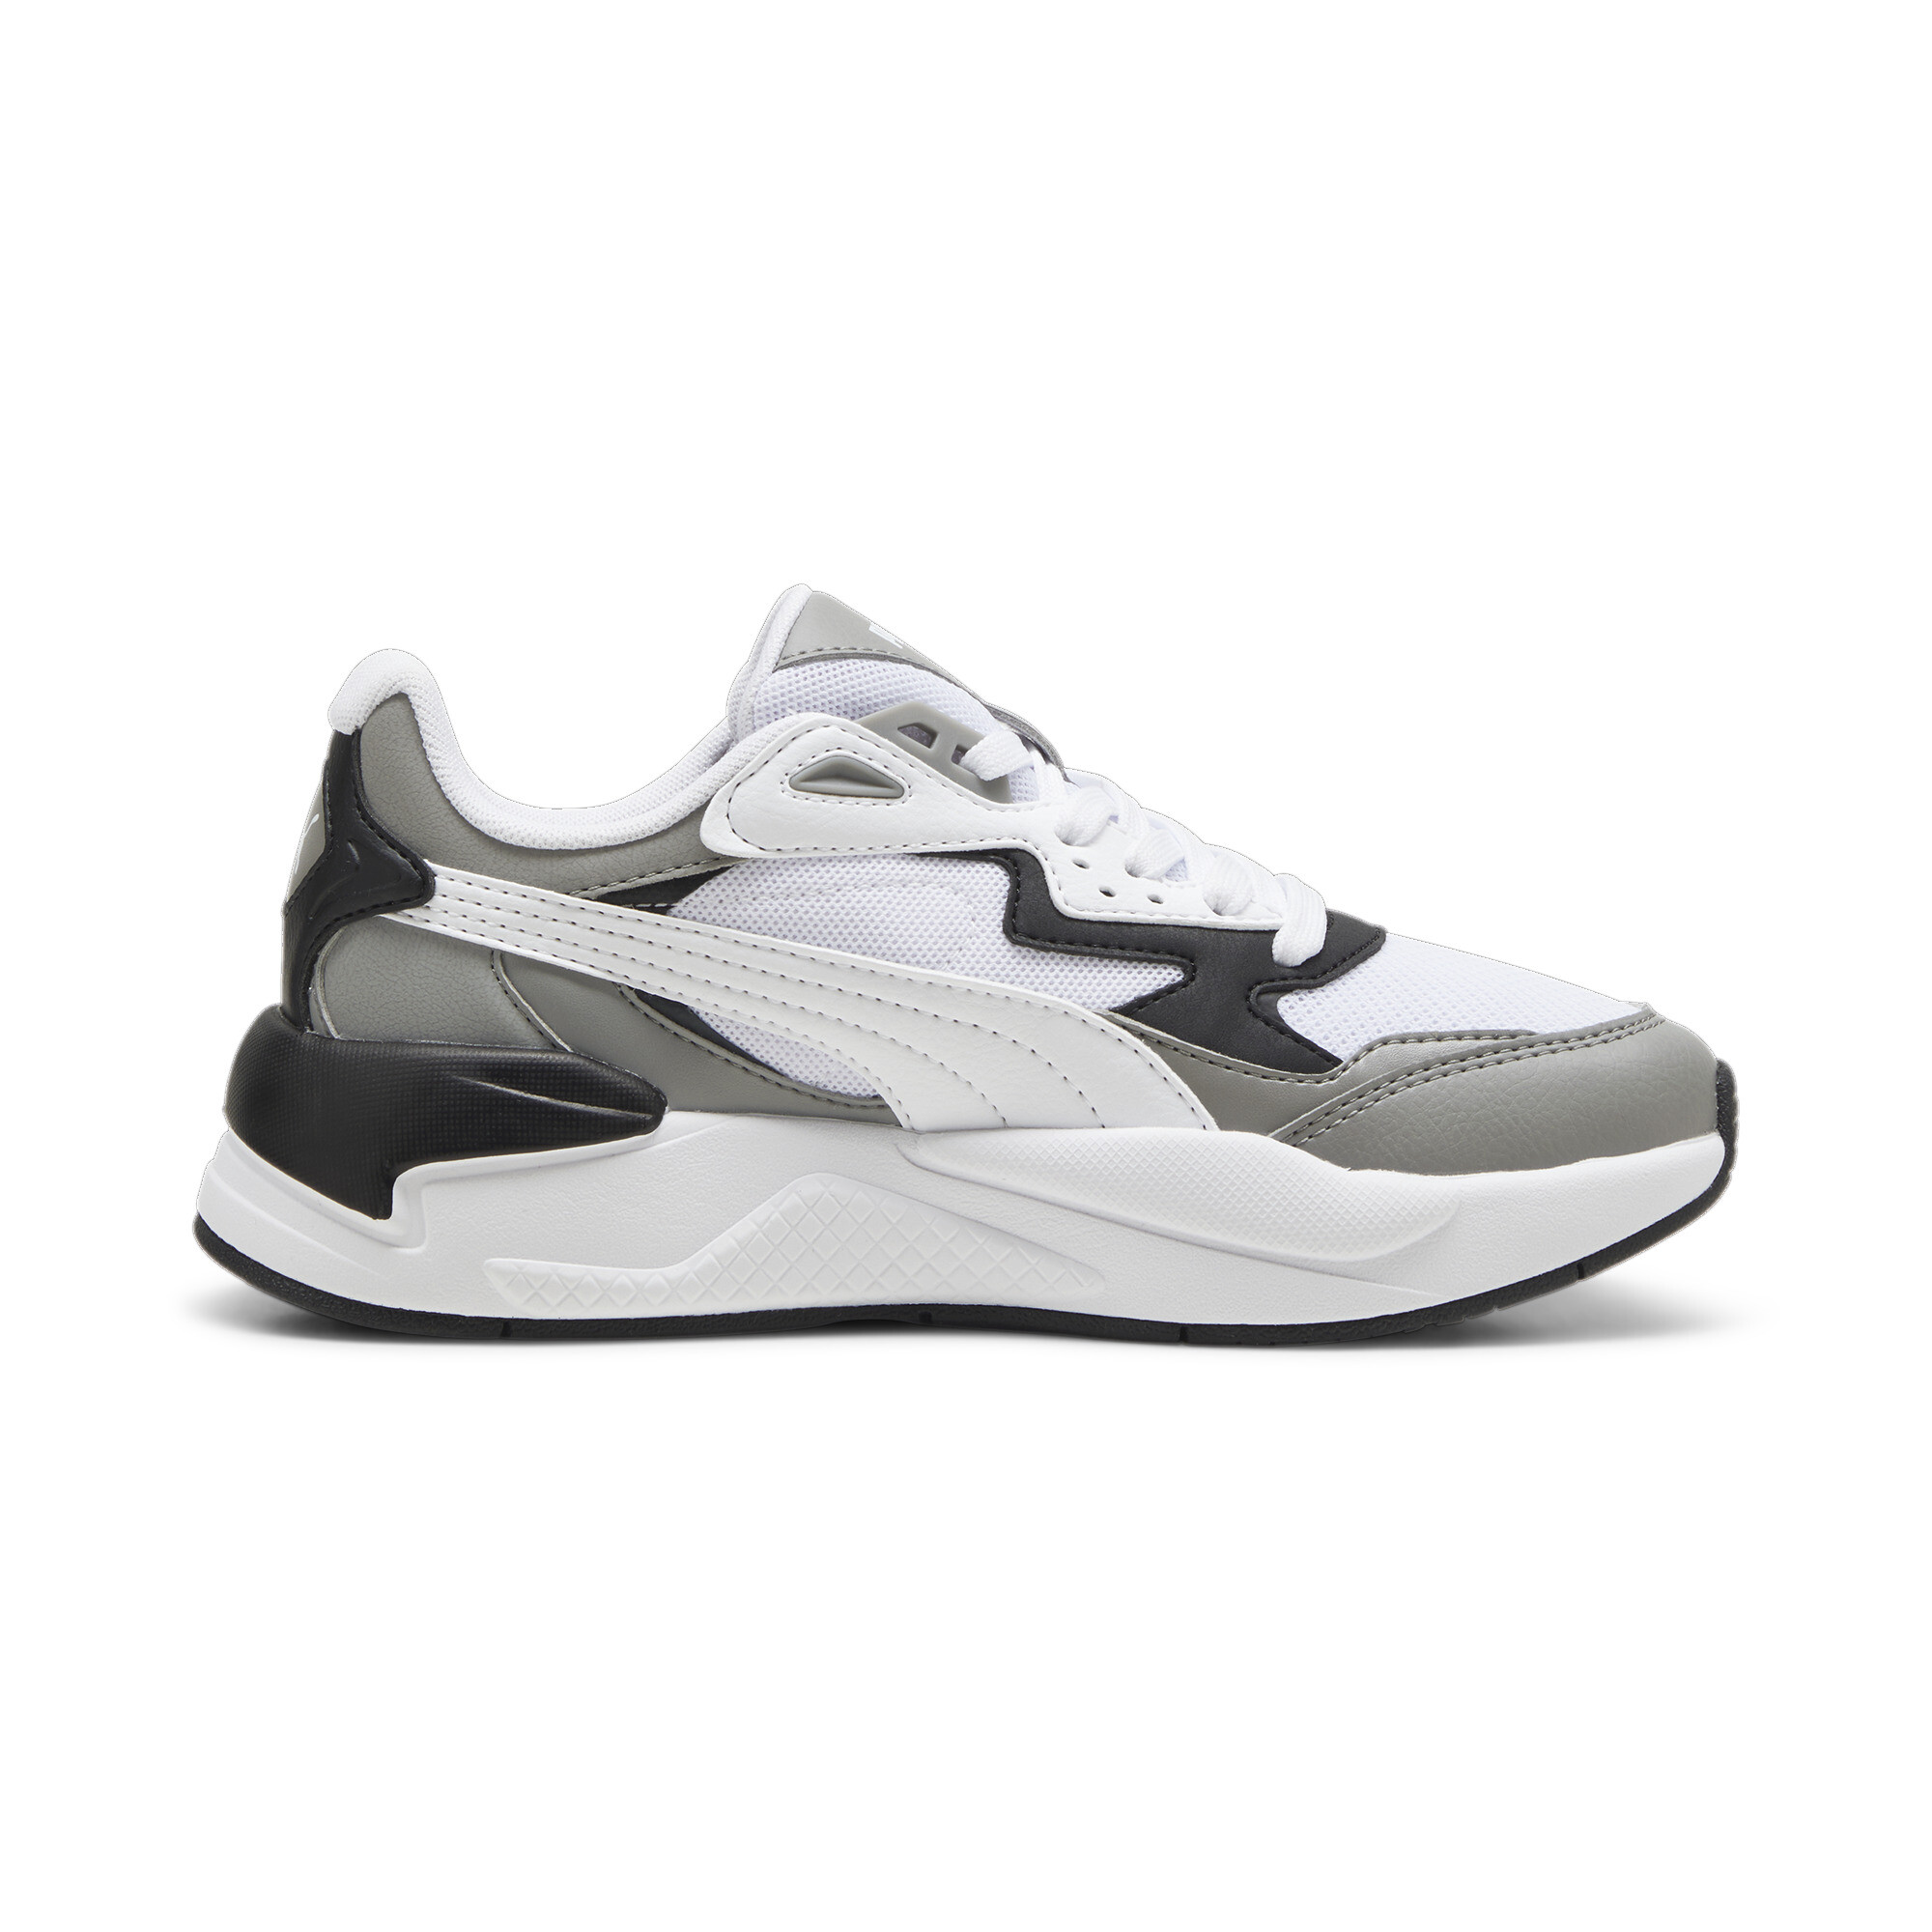 Puma X-Ray Speed Youth Trainers, Gray, Size 37.5, Shoes